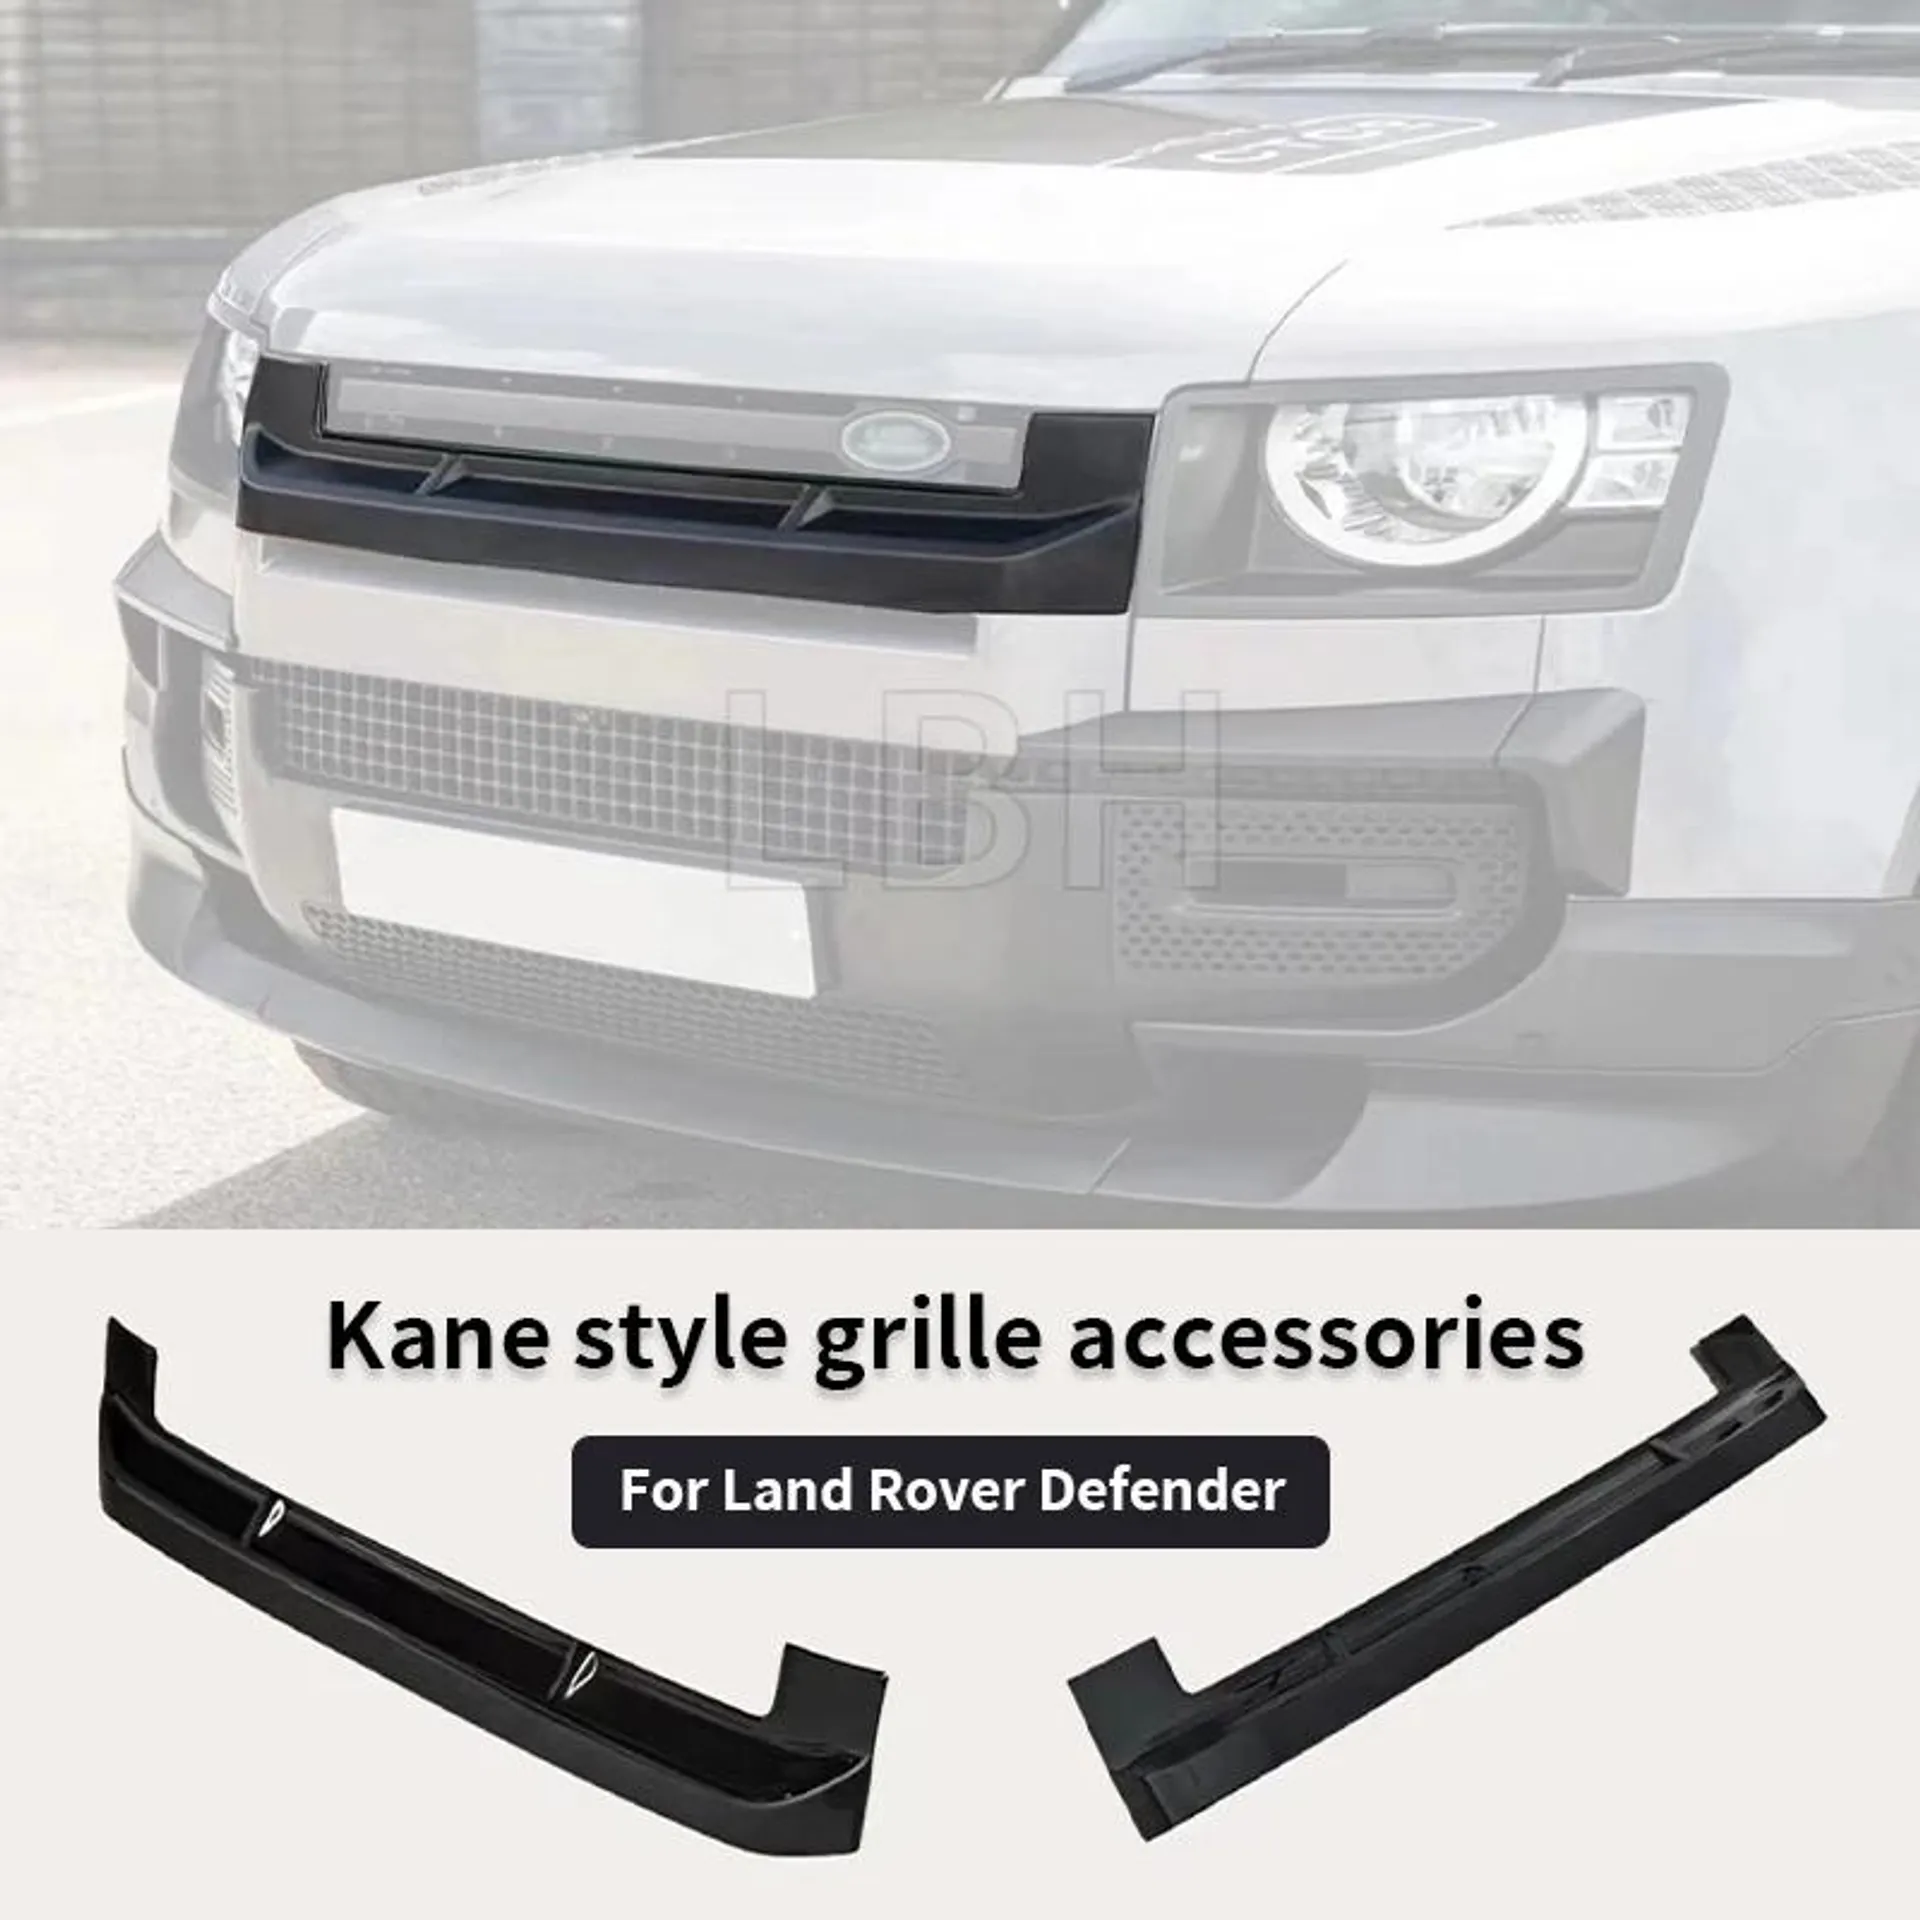 be suitable for Land Rover Defender Kane style front bumper grille decorative panel decorative strip body accessories